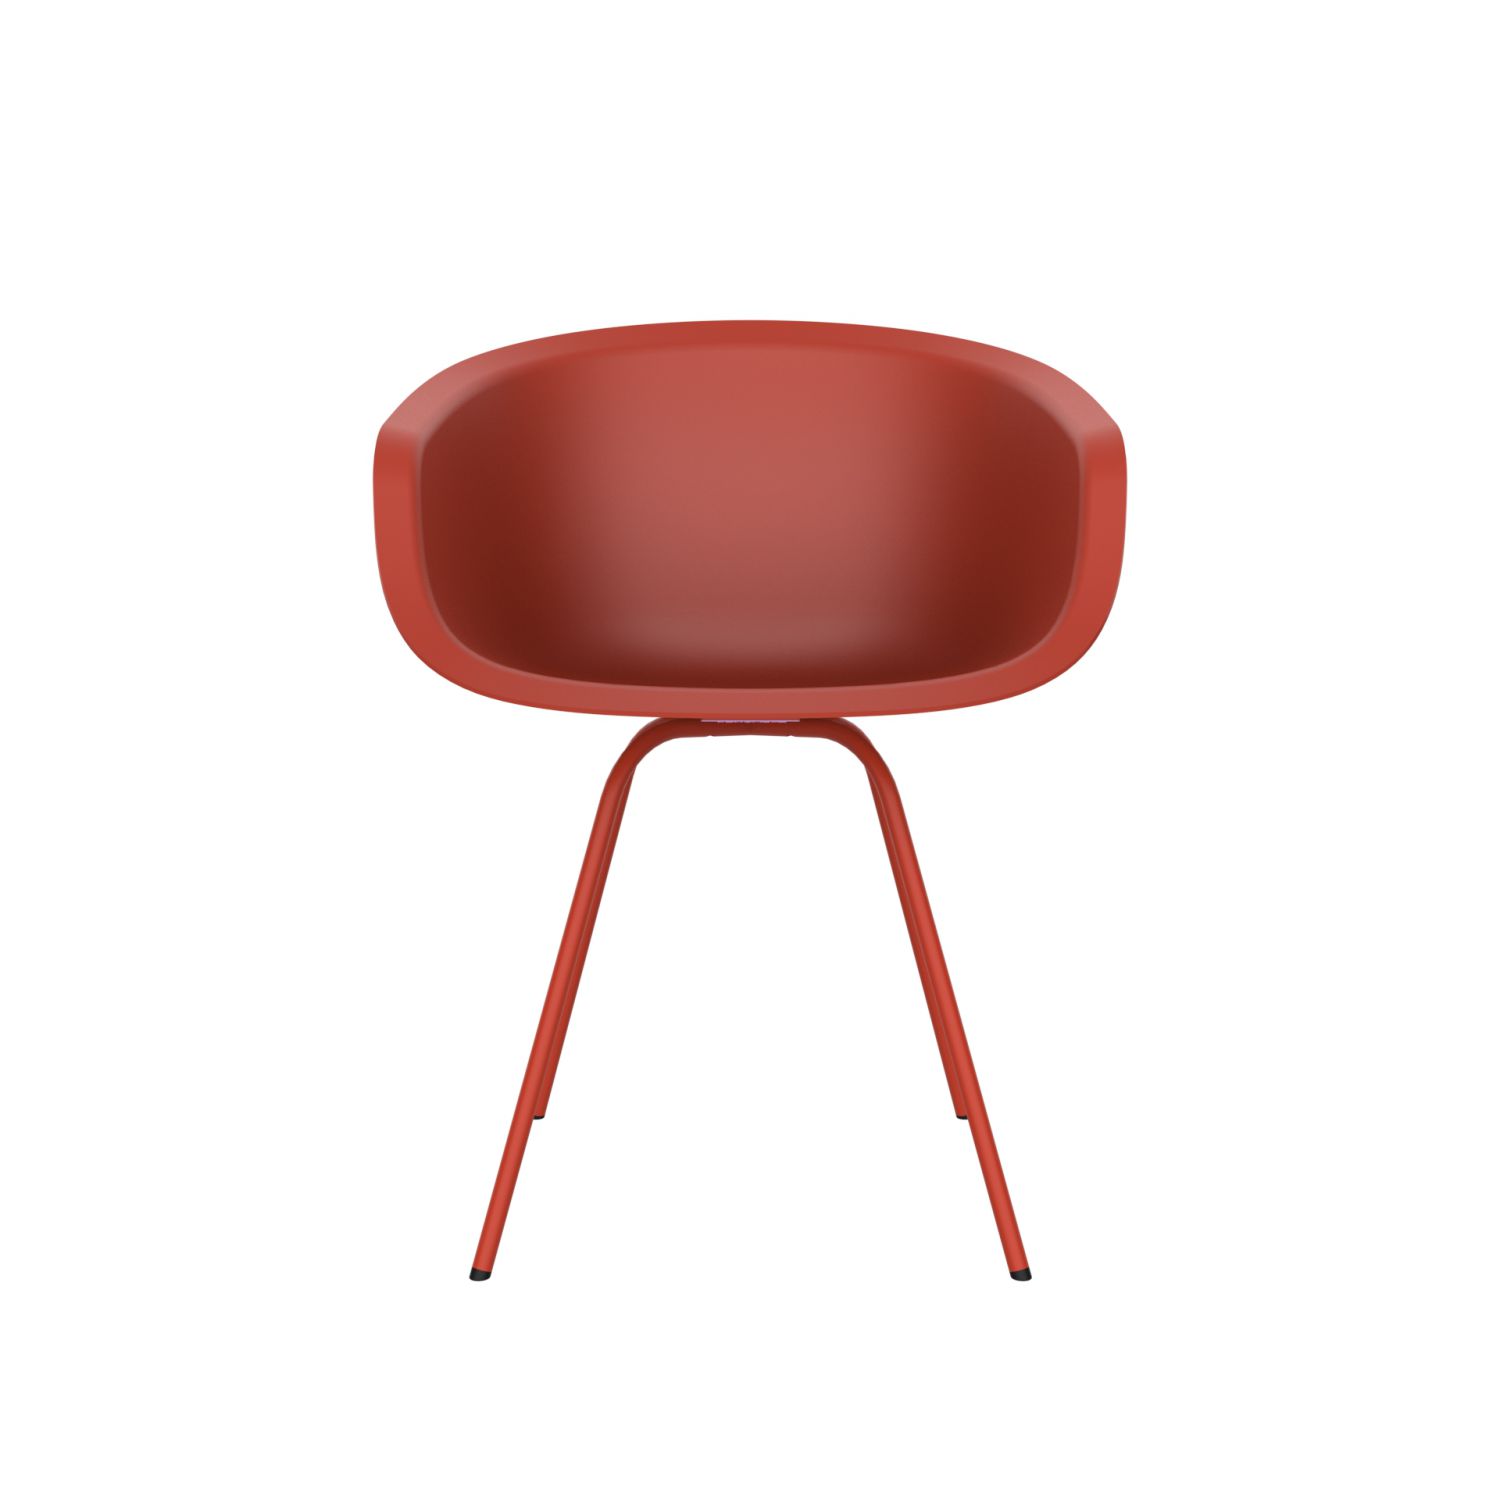 lensvelt richard hutten this bucket chair with steel base vermilion red ral2002 vermilion red ral2002 hard leg ends